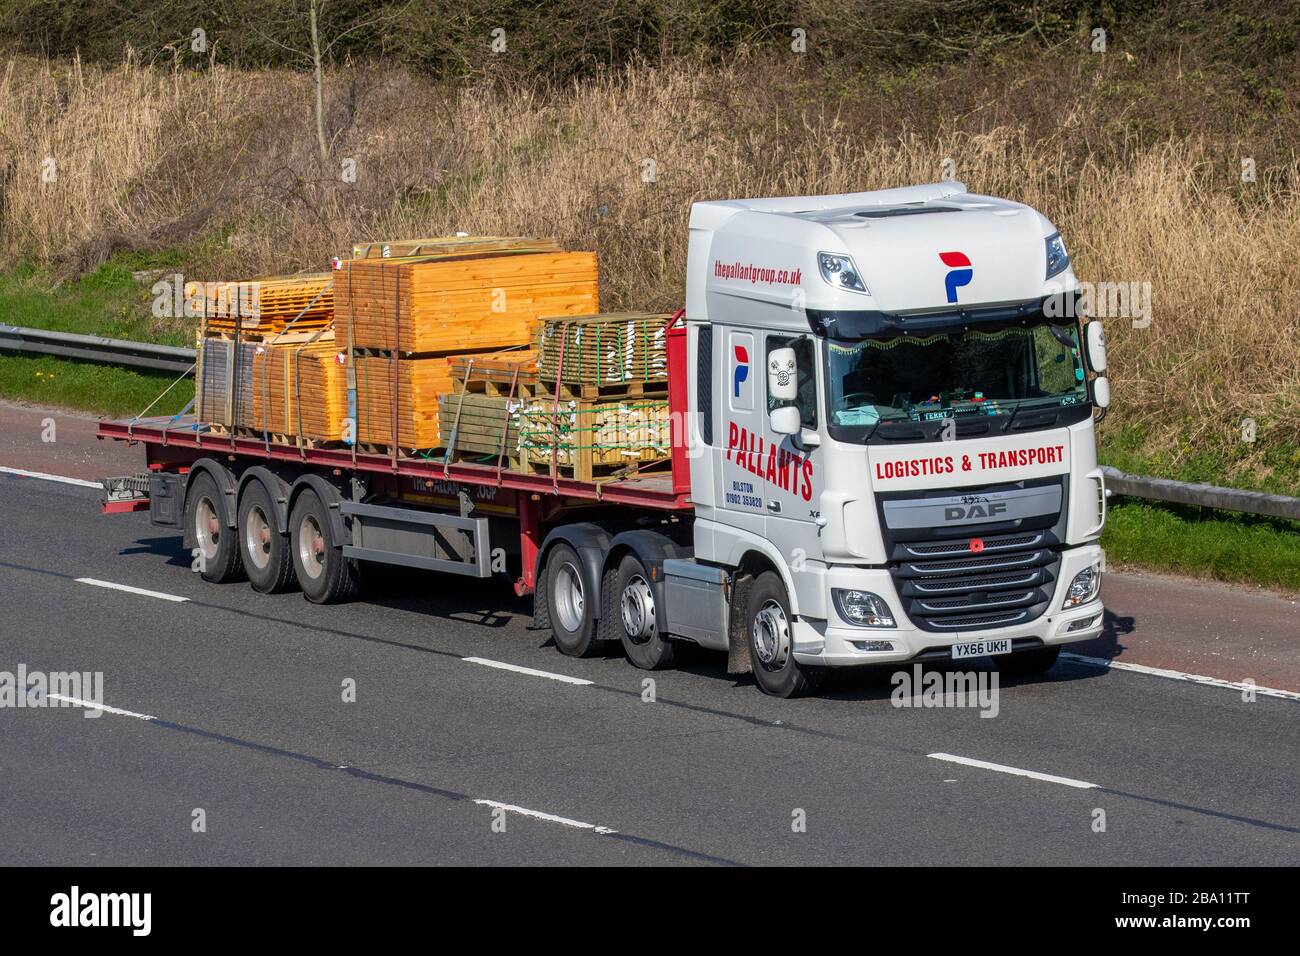 Pallants Haulage timber delivery trucks, lorry logistics, transportation, truck, timber products cargo carrier, DAF XF vehicle, European commercial transport, industry, M6 at Manchester, UK Stock Photo